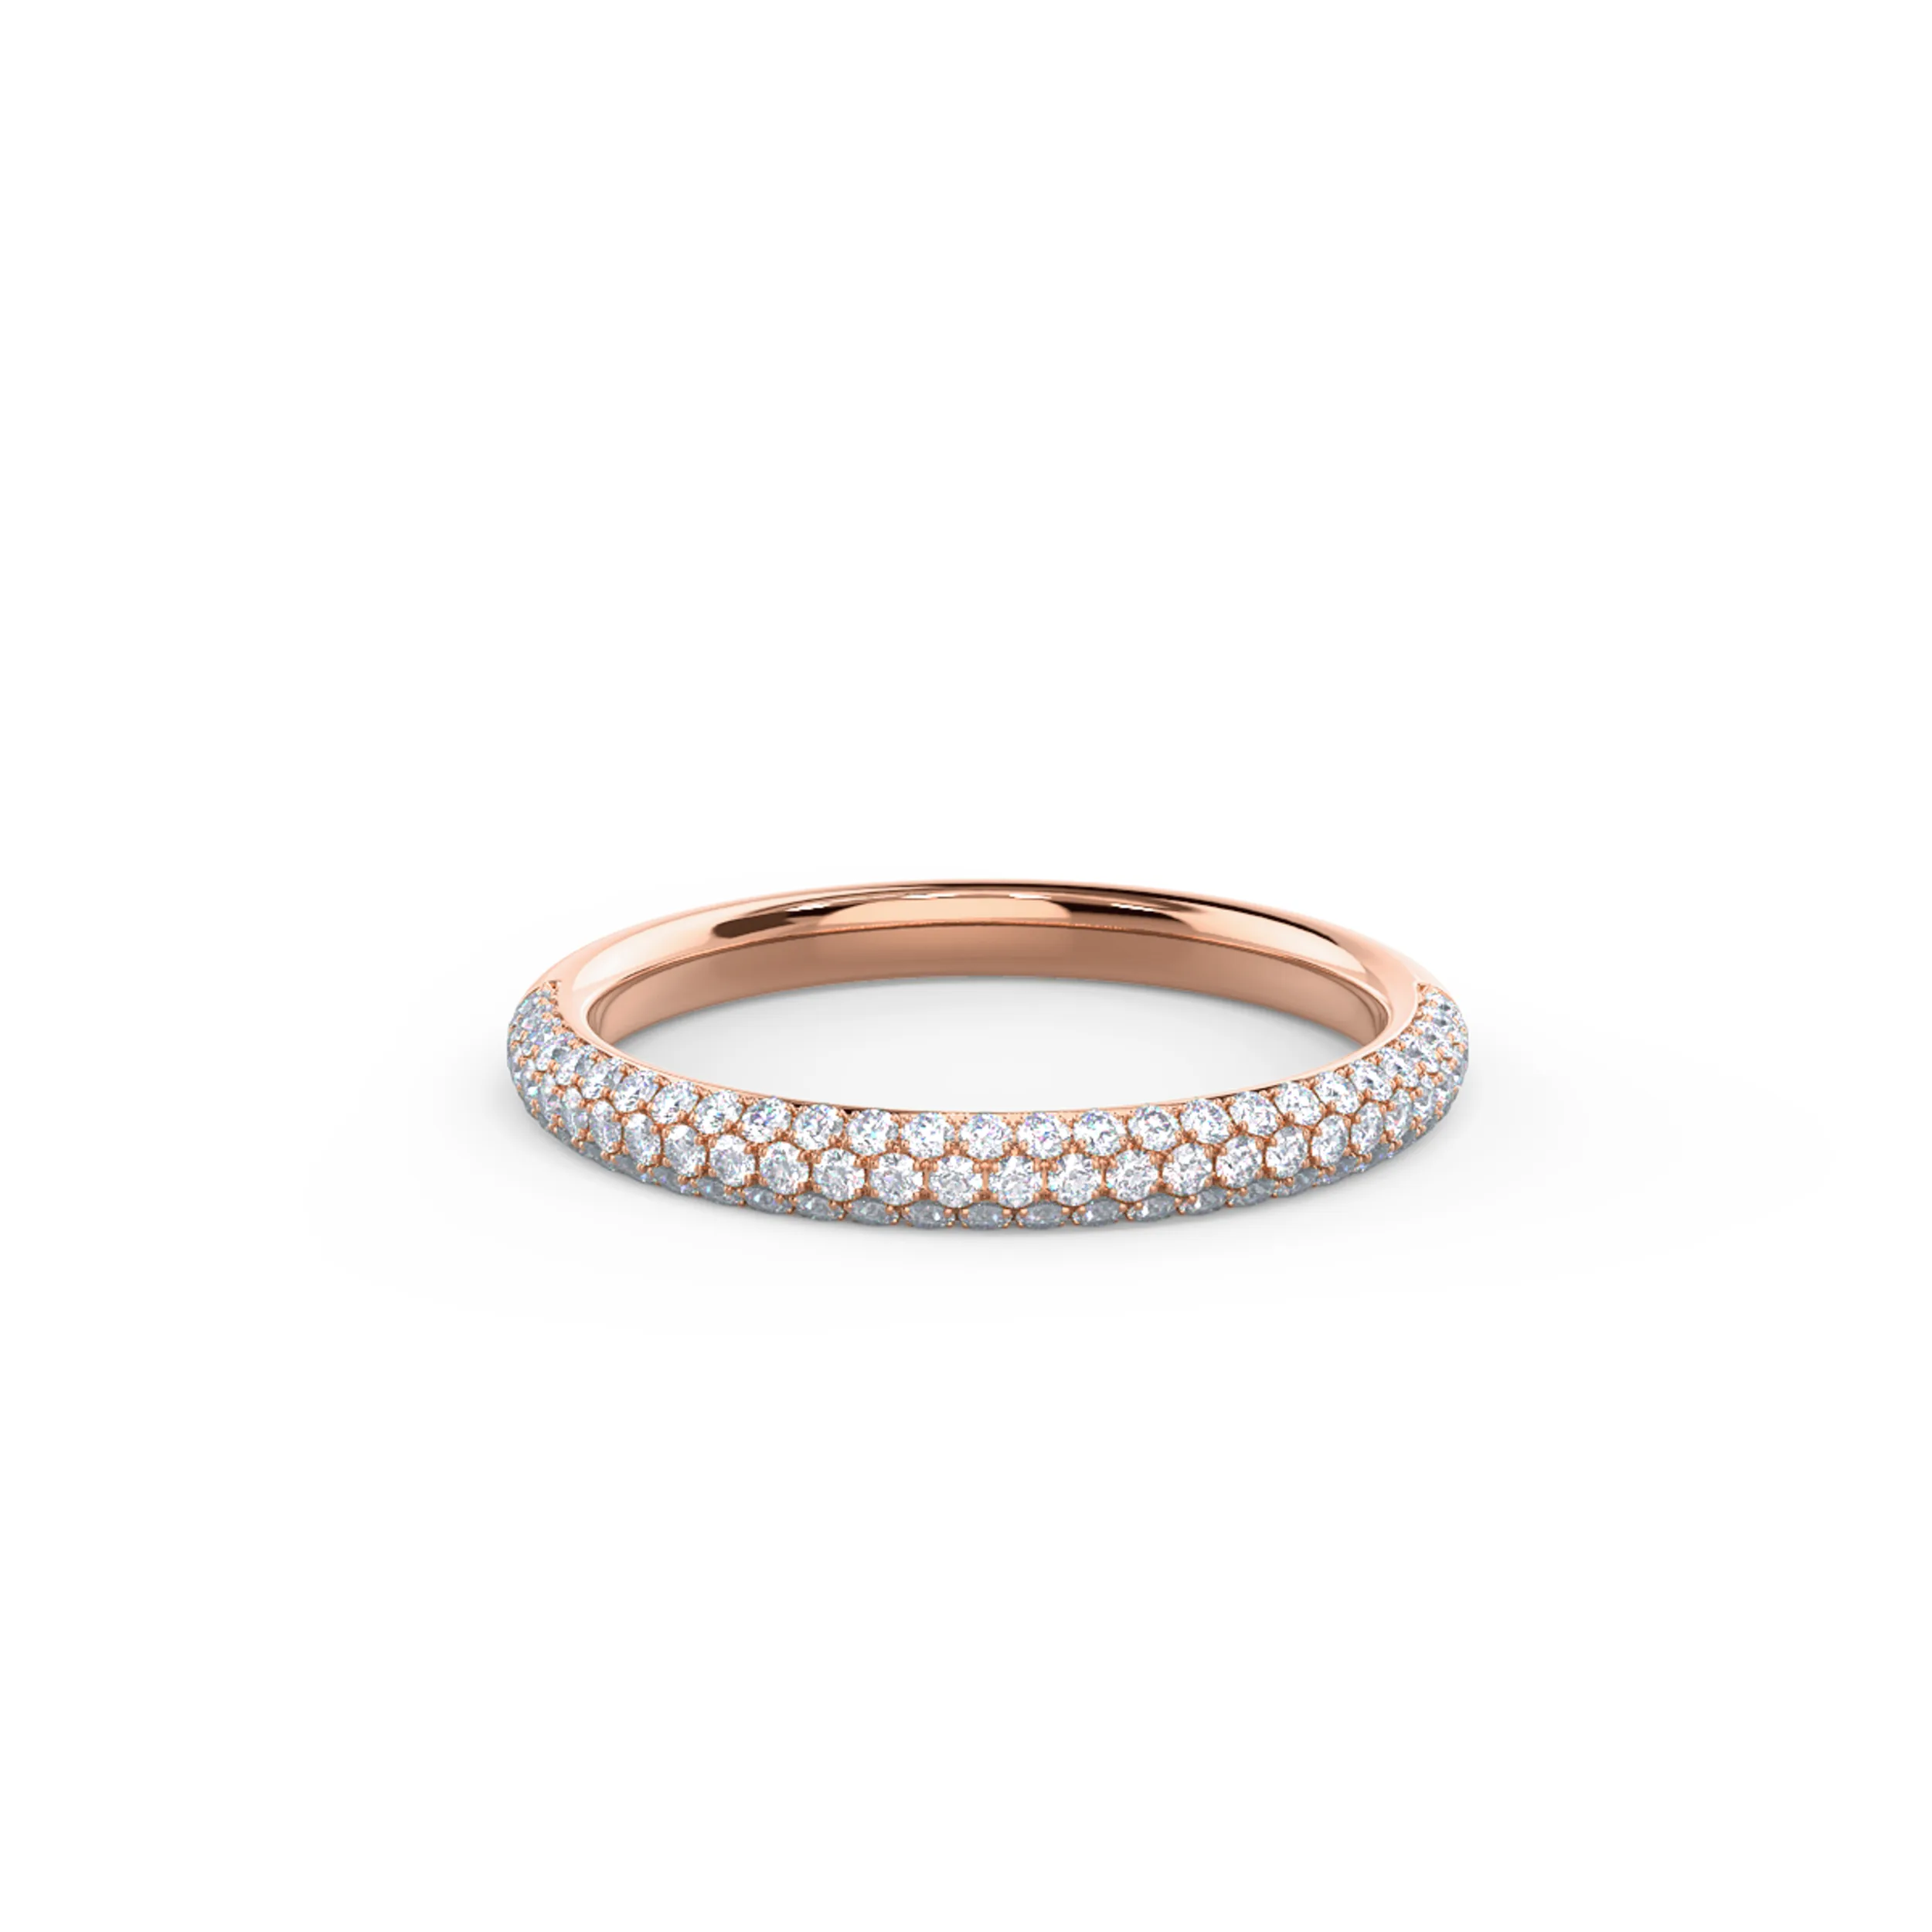 High Quality 0.4 Carat Round Man Made Diamonds set in 14kt Rose Gold Three Sided Pavé Half Band (Main View)